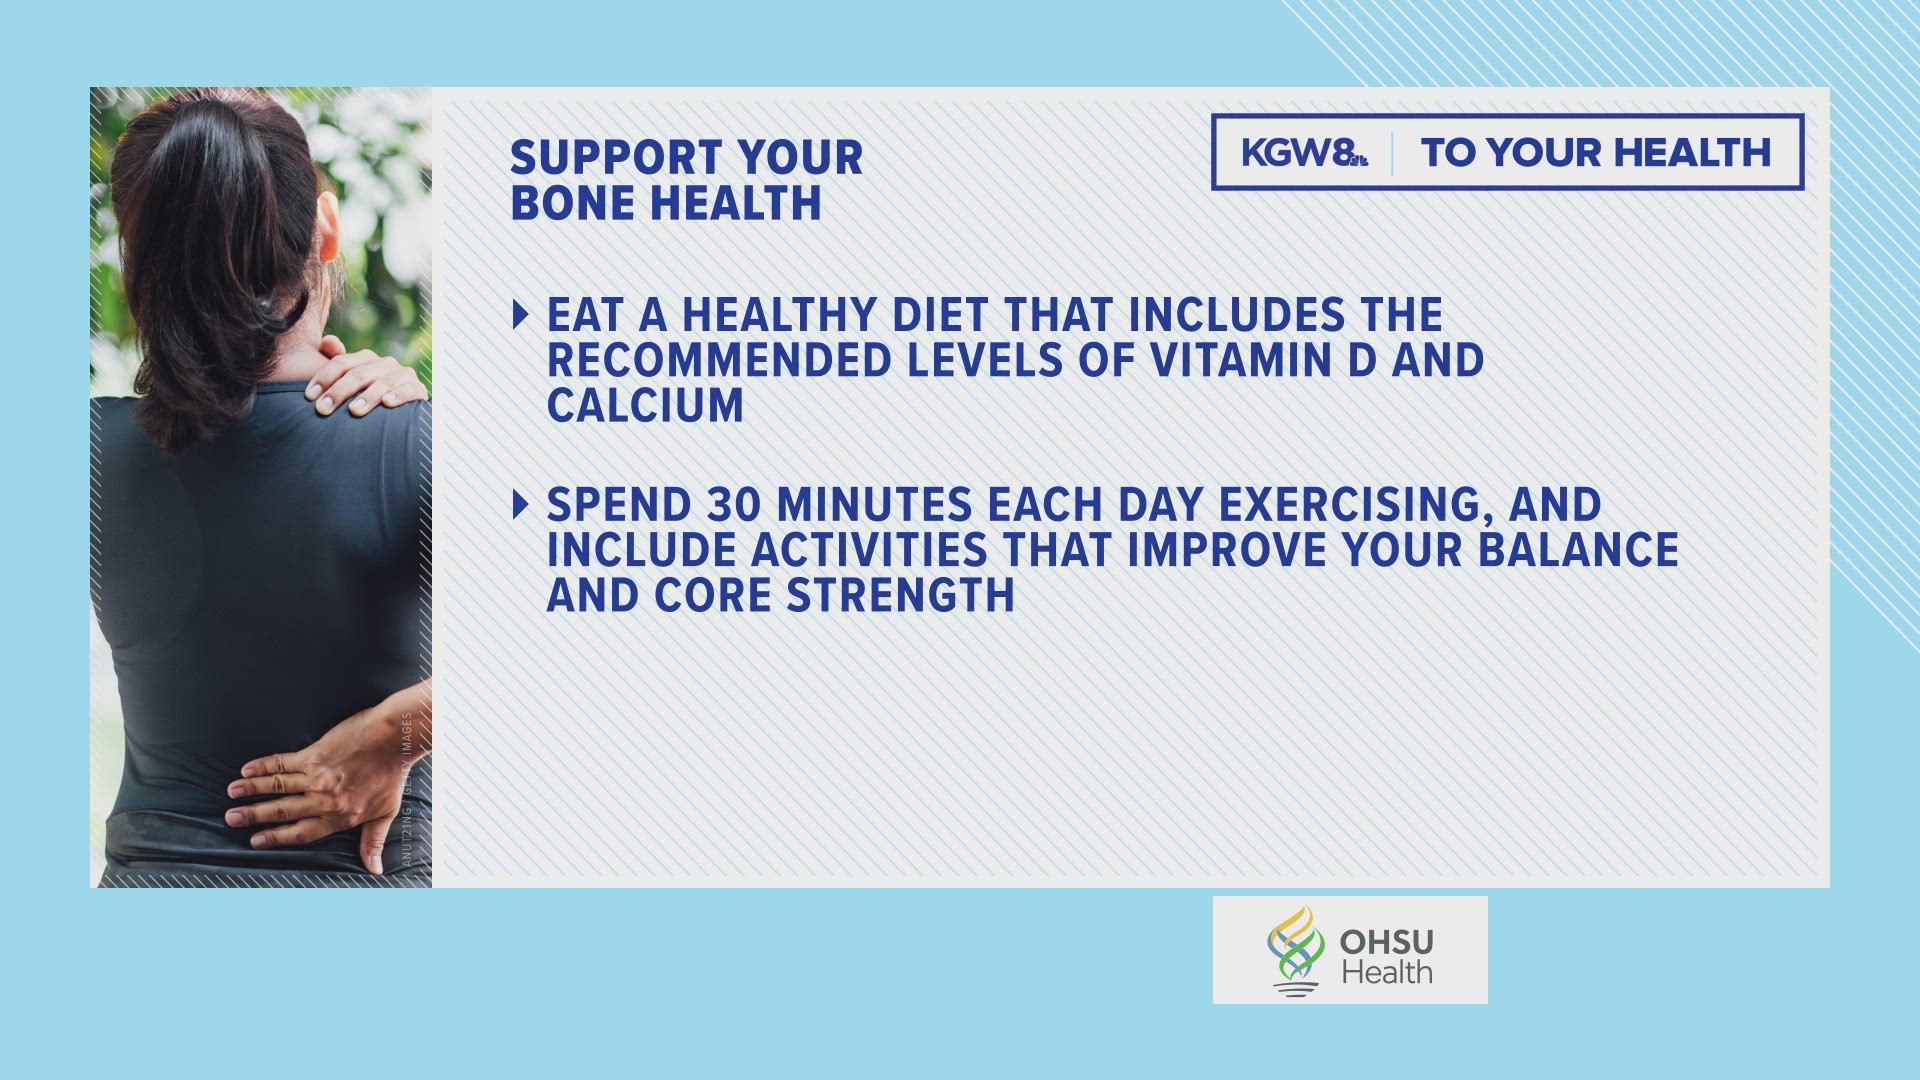 From OHSU Health, here are three tips to support your bone health.